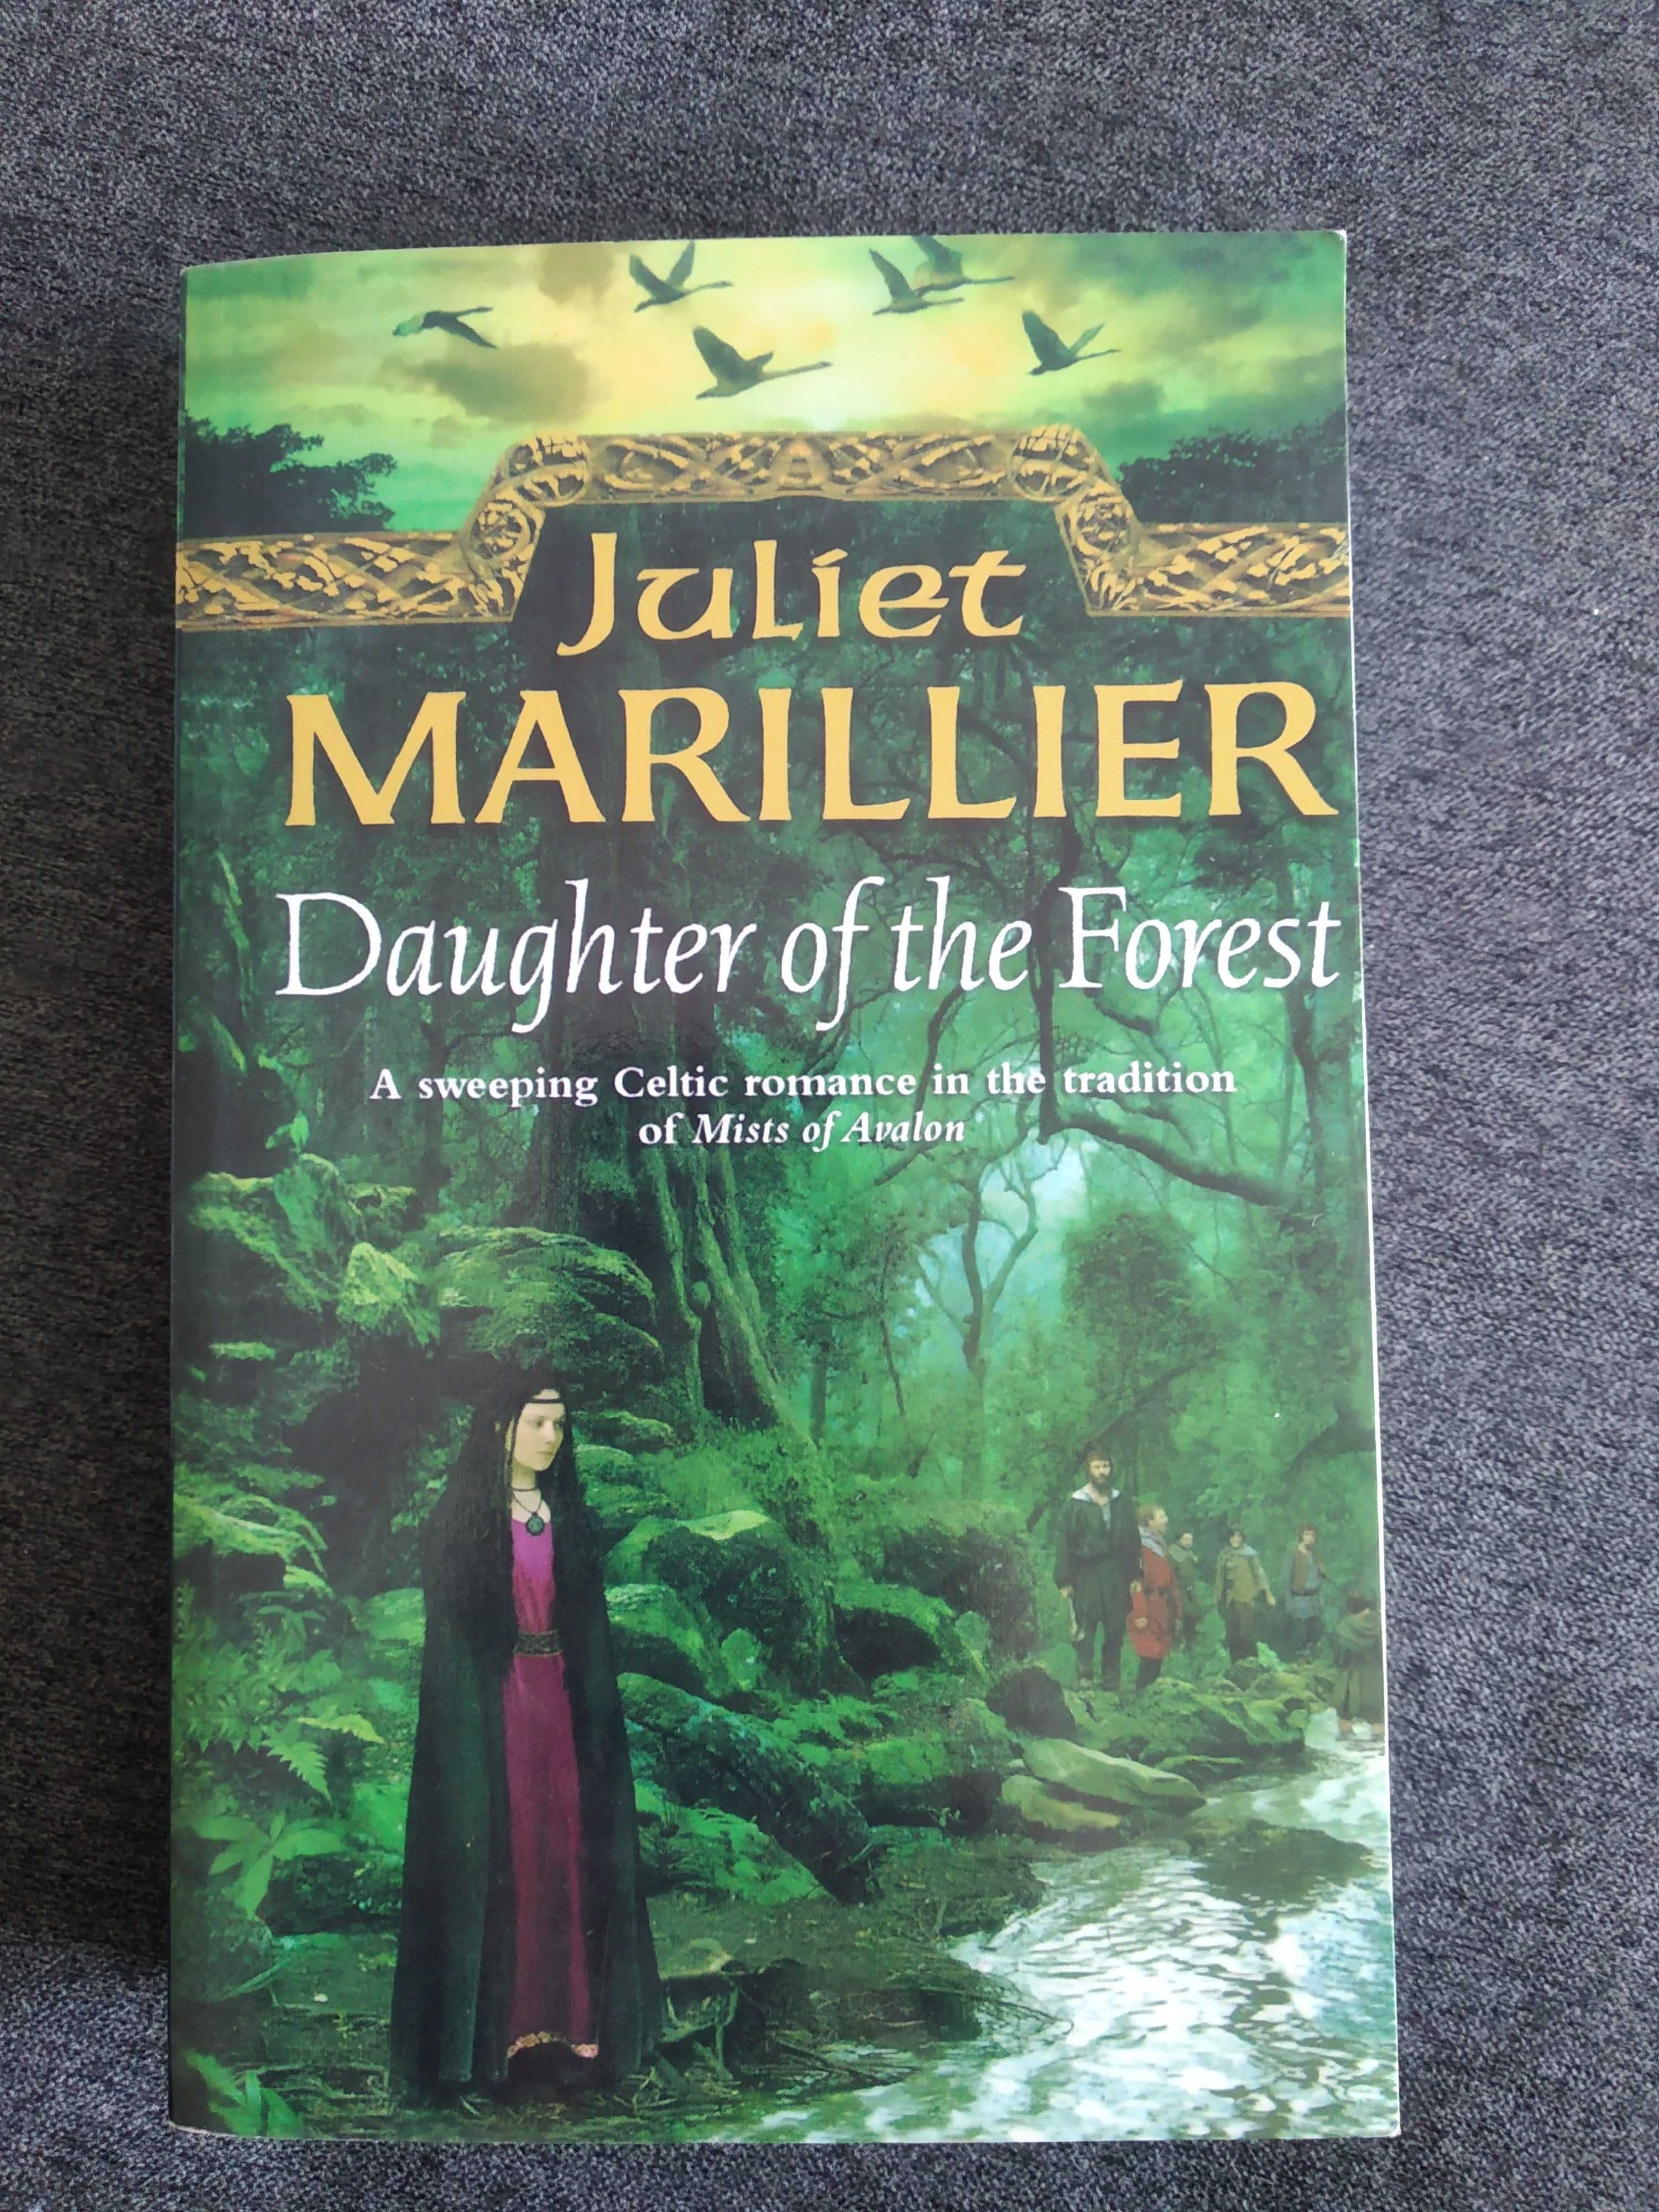 Daughter of the forest - Juliet Marillier